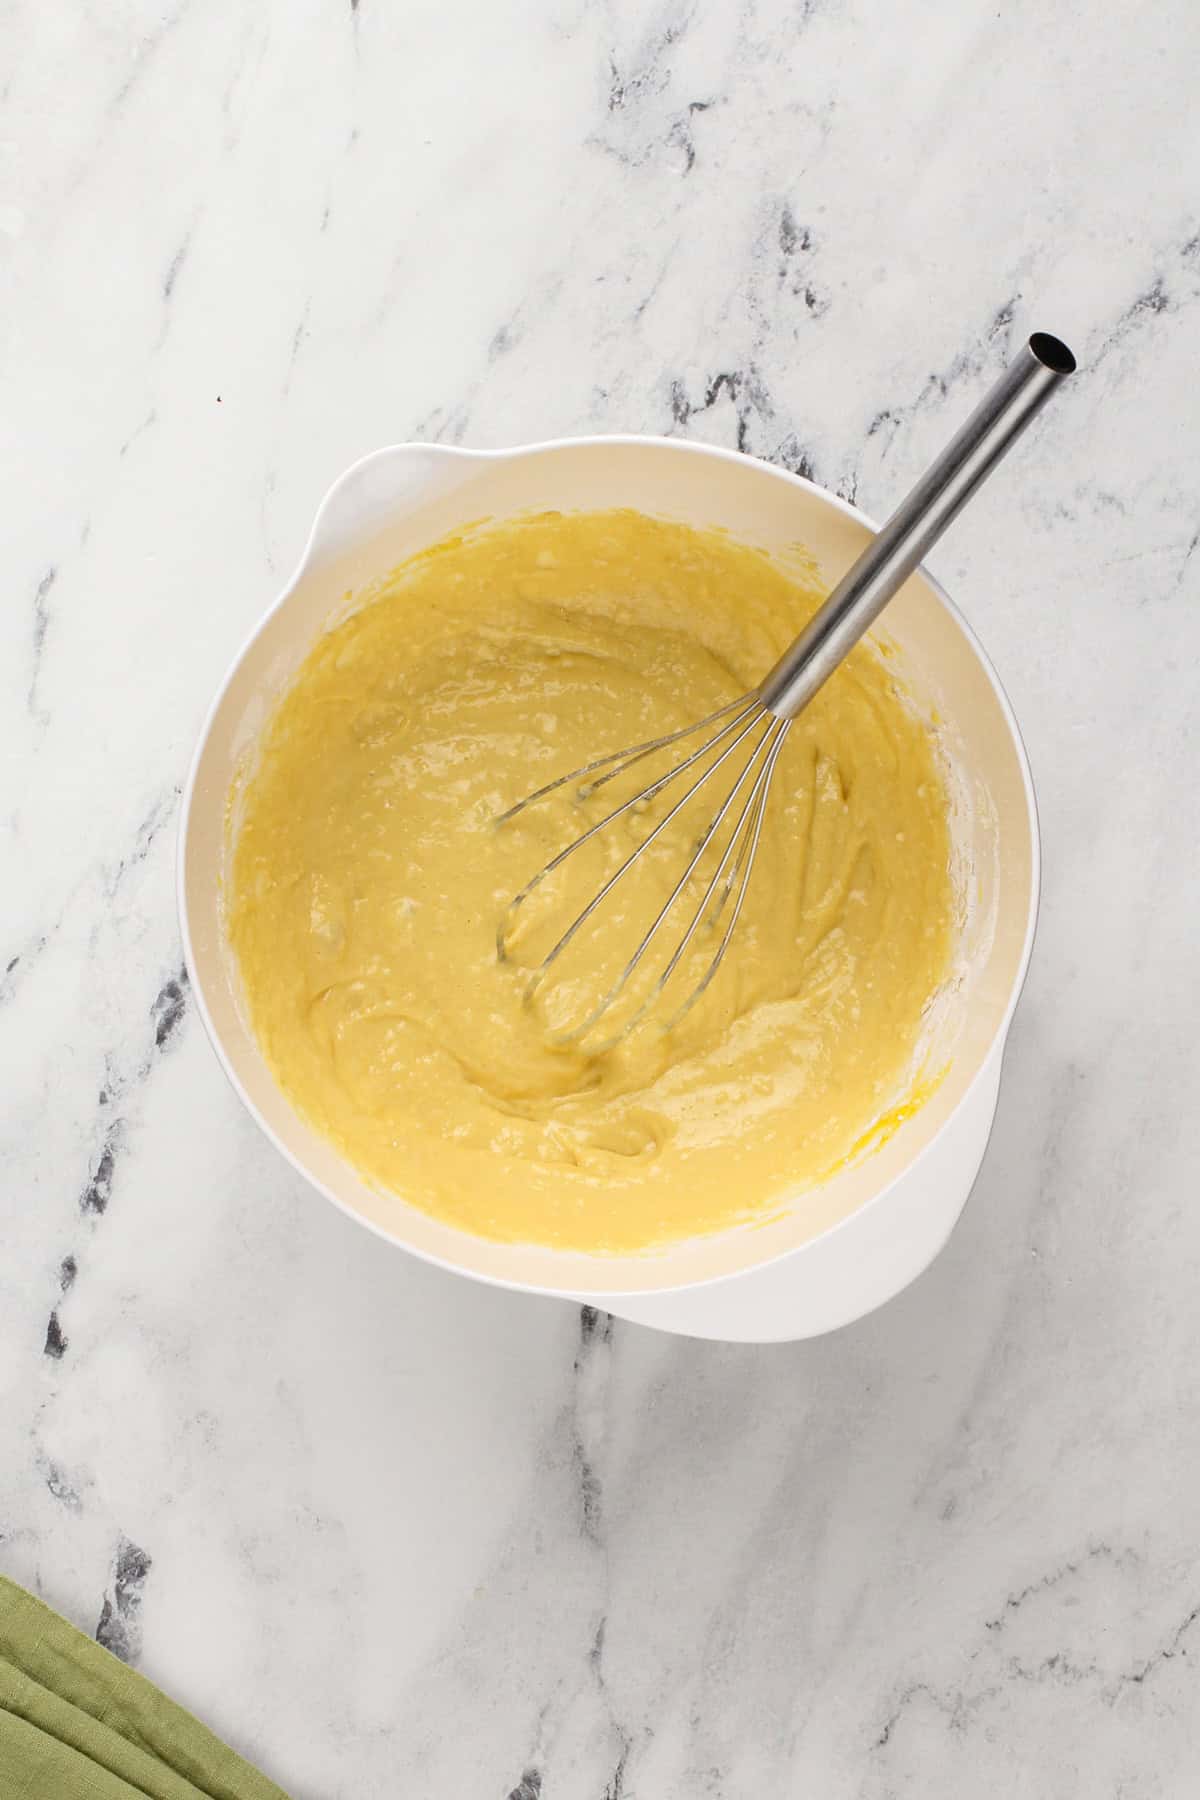 Eggs and bisquick mix whisked together in a white bowl.